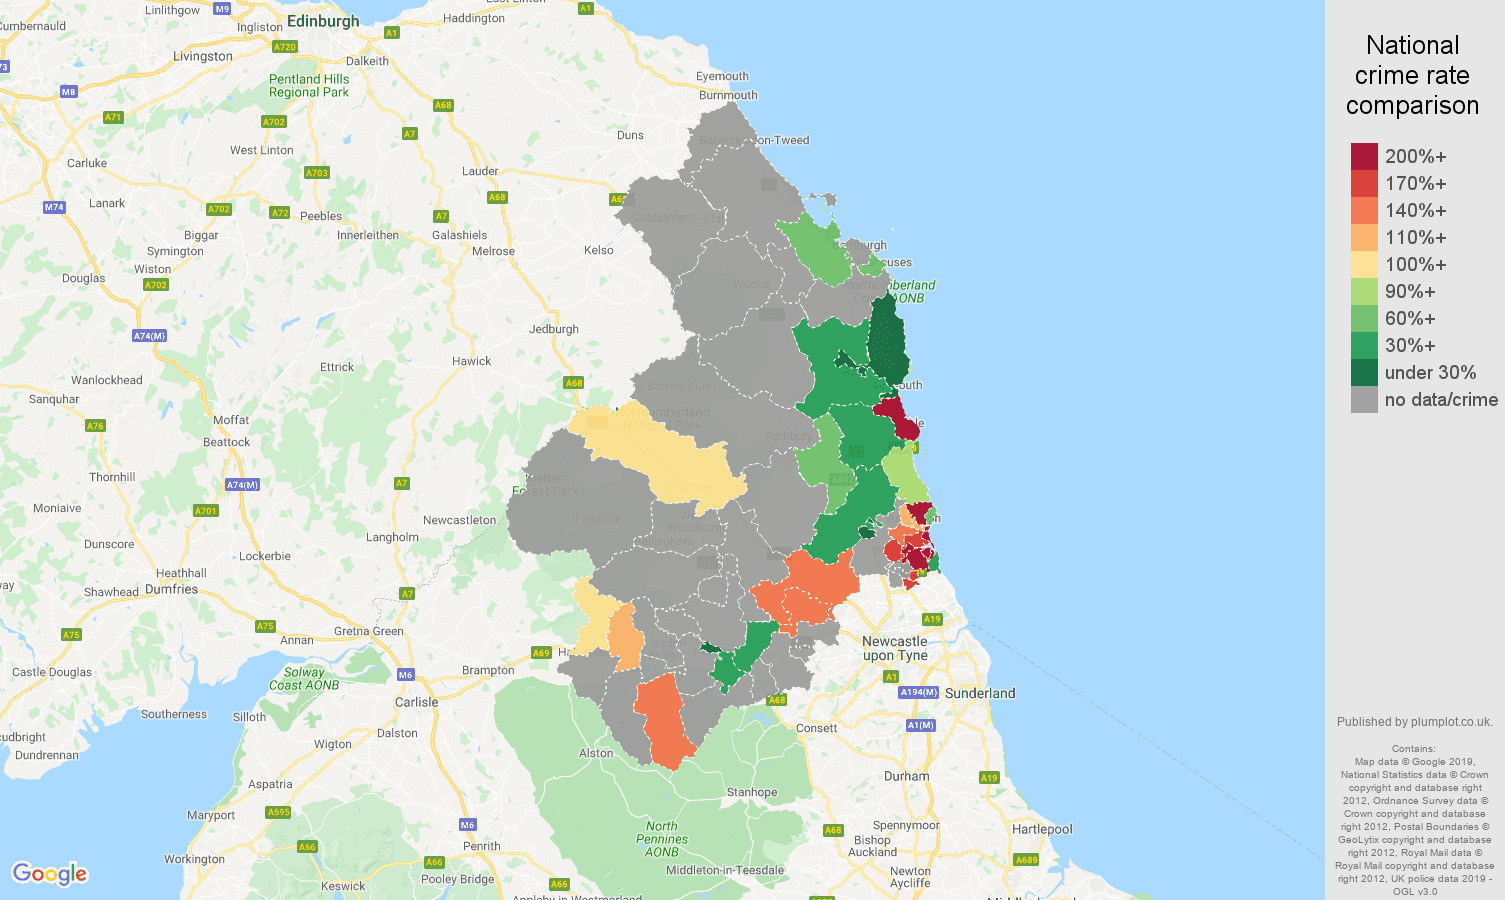 Northumberland possession of weapons crime rate comparison map